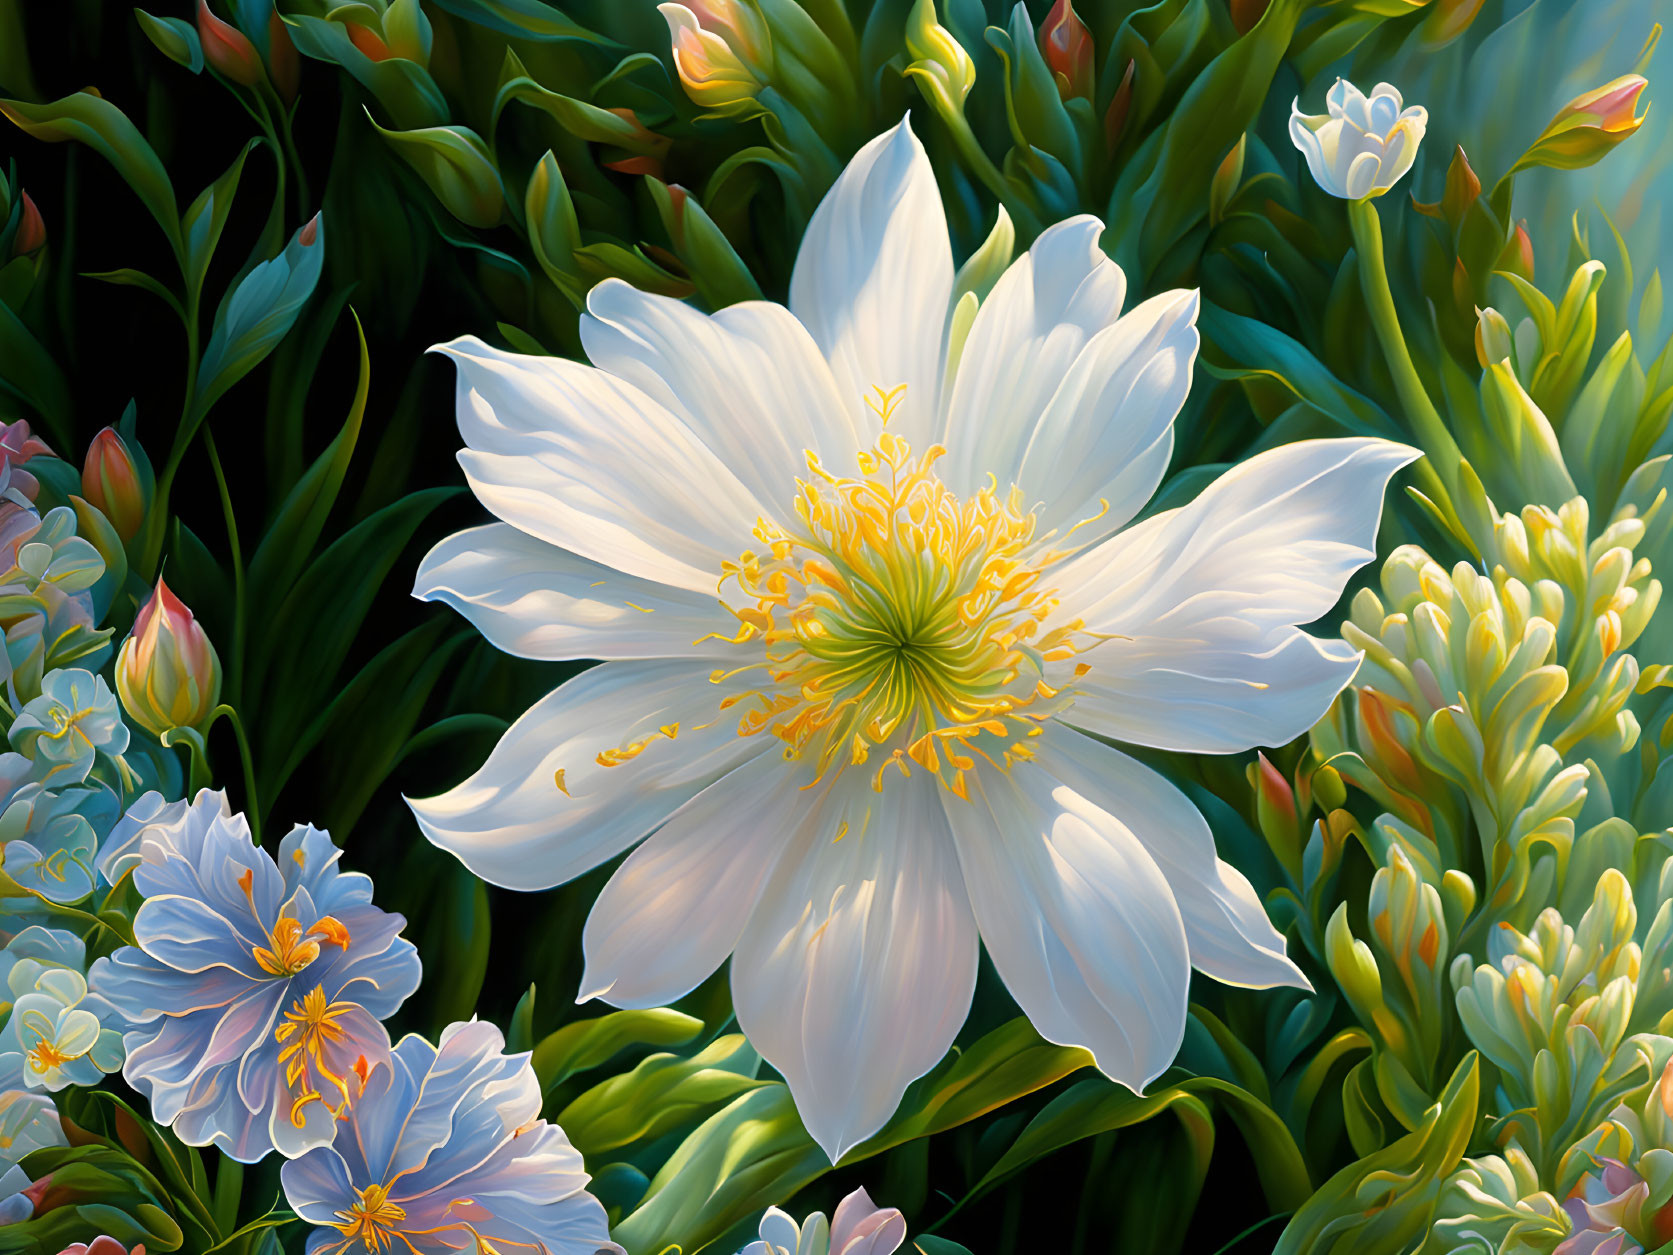 Colorful Digital Painting of White Flower with Yellow Center surrounded by Blue Blossoms and Green Foliage